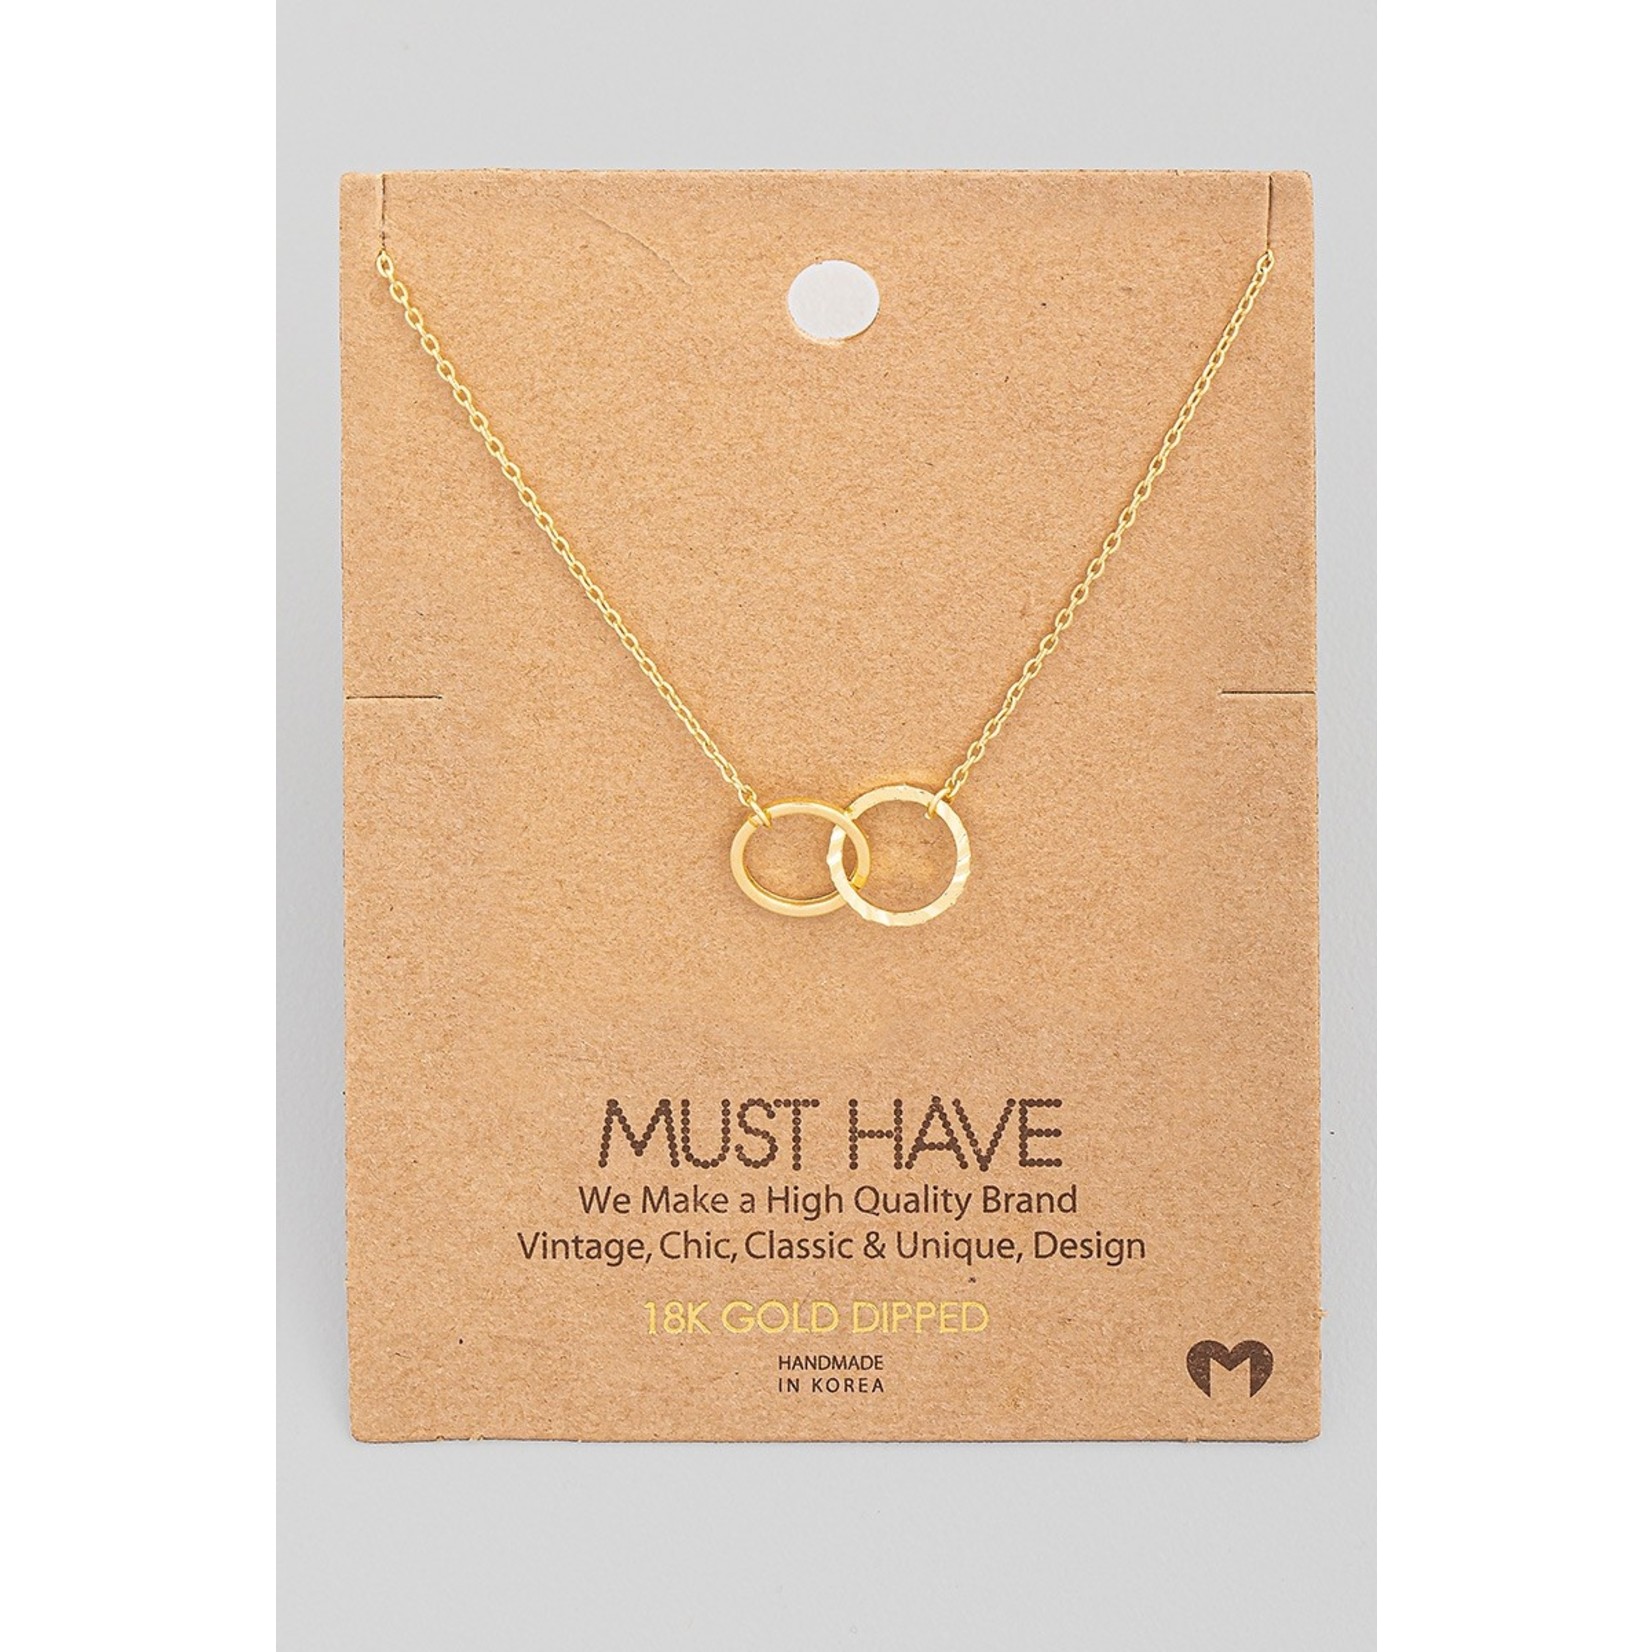 The Double Ring Link Necklace